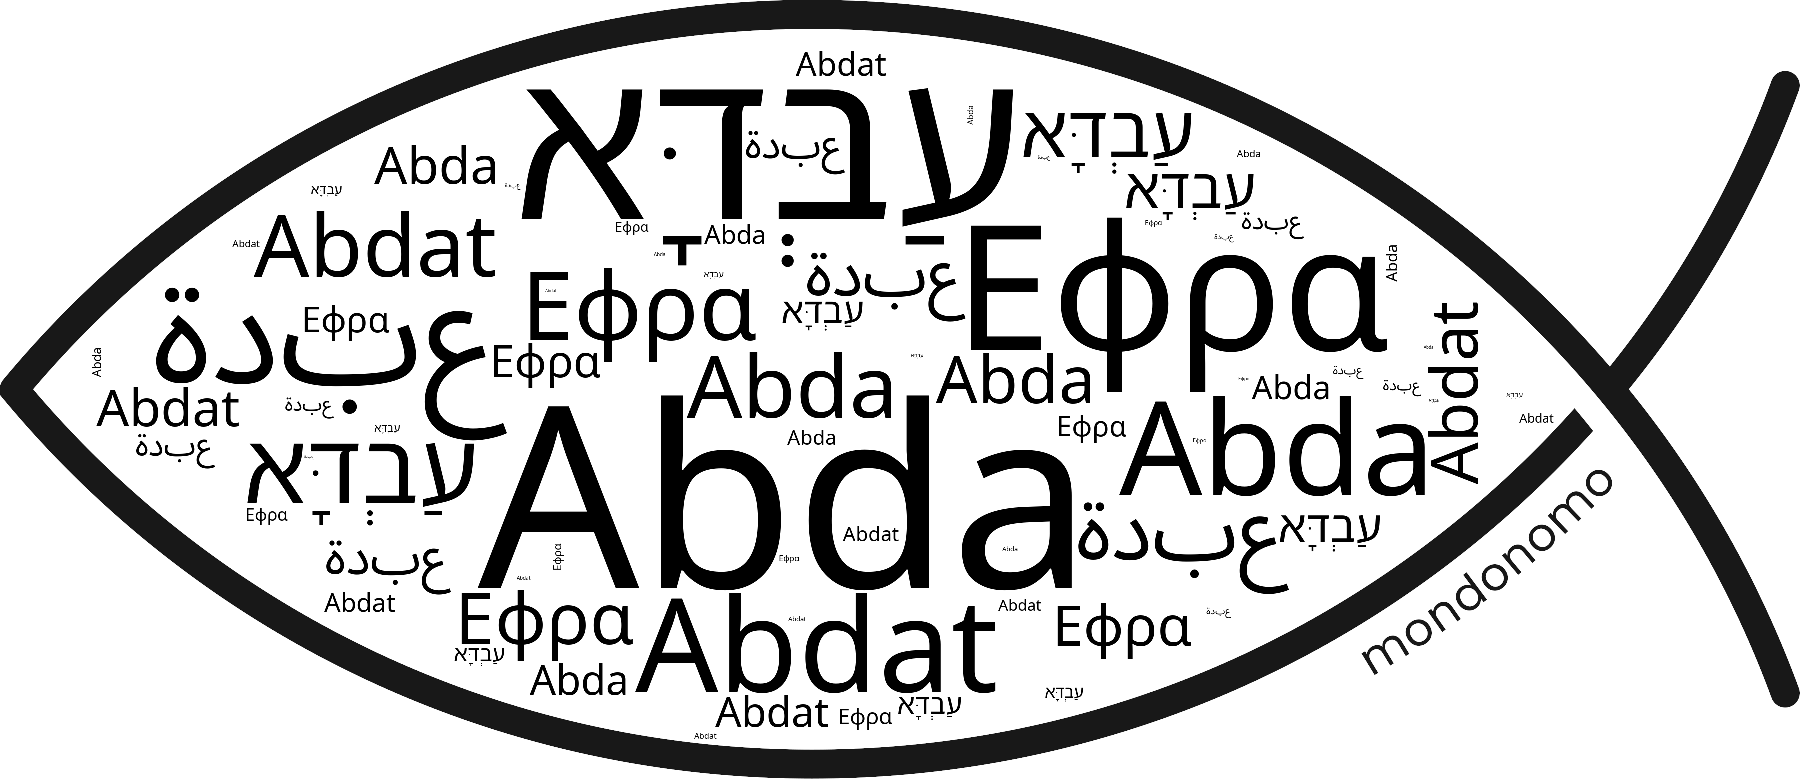 Name Abda in the world's Bibles